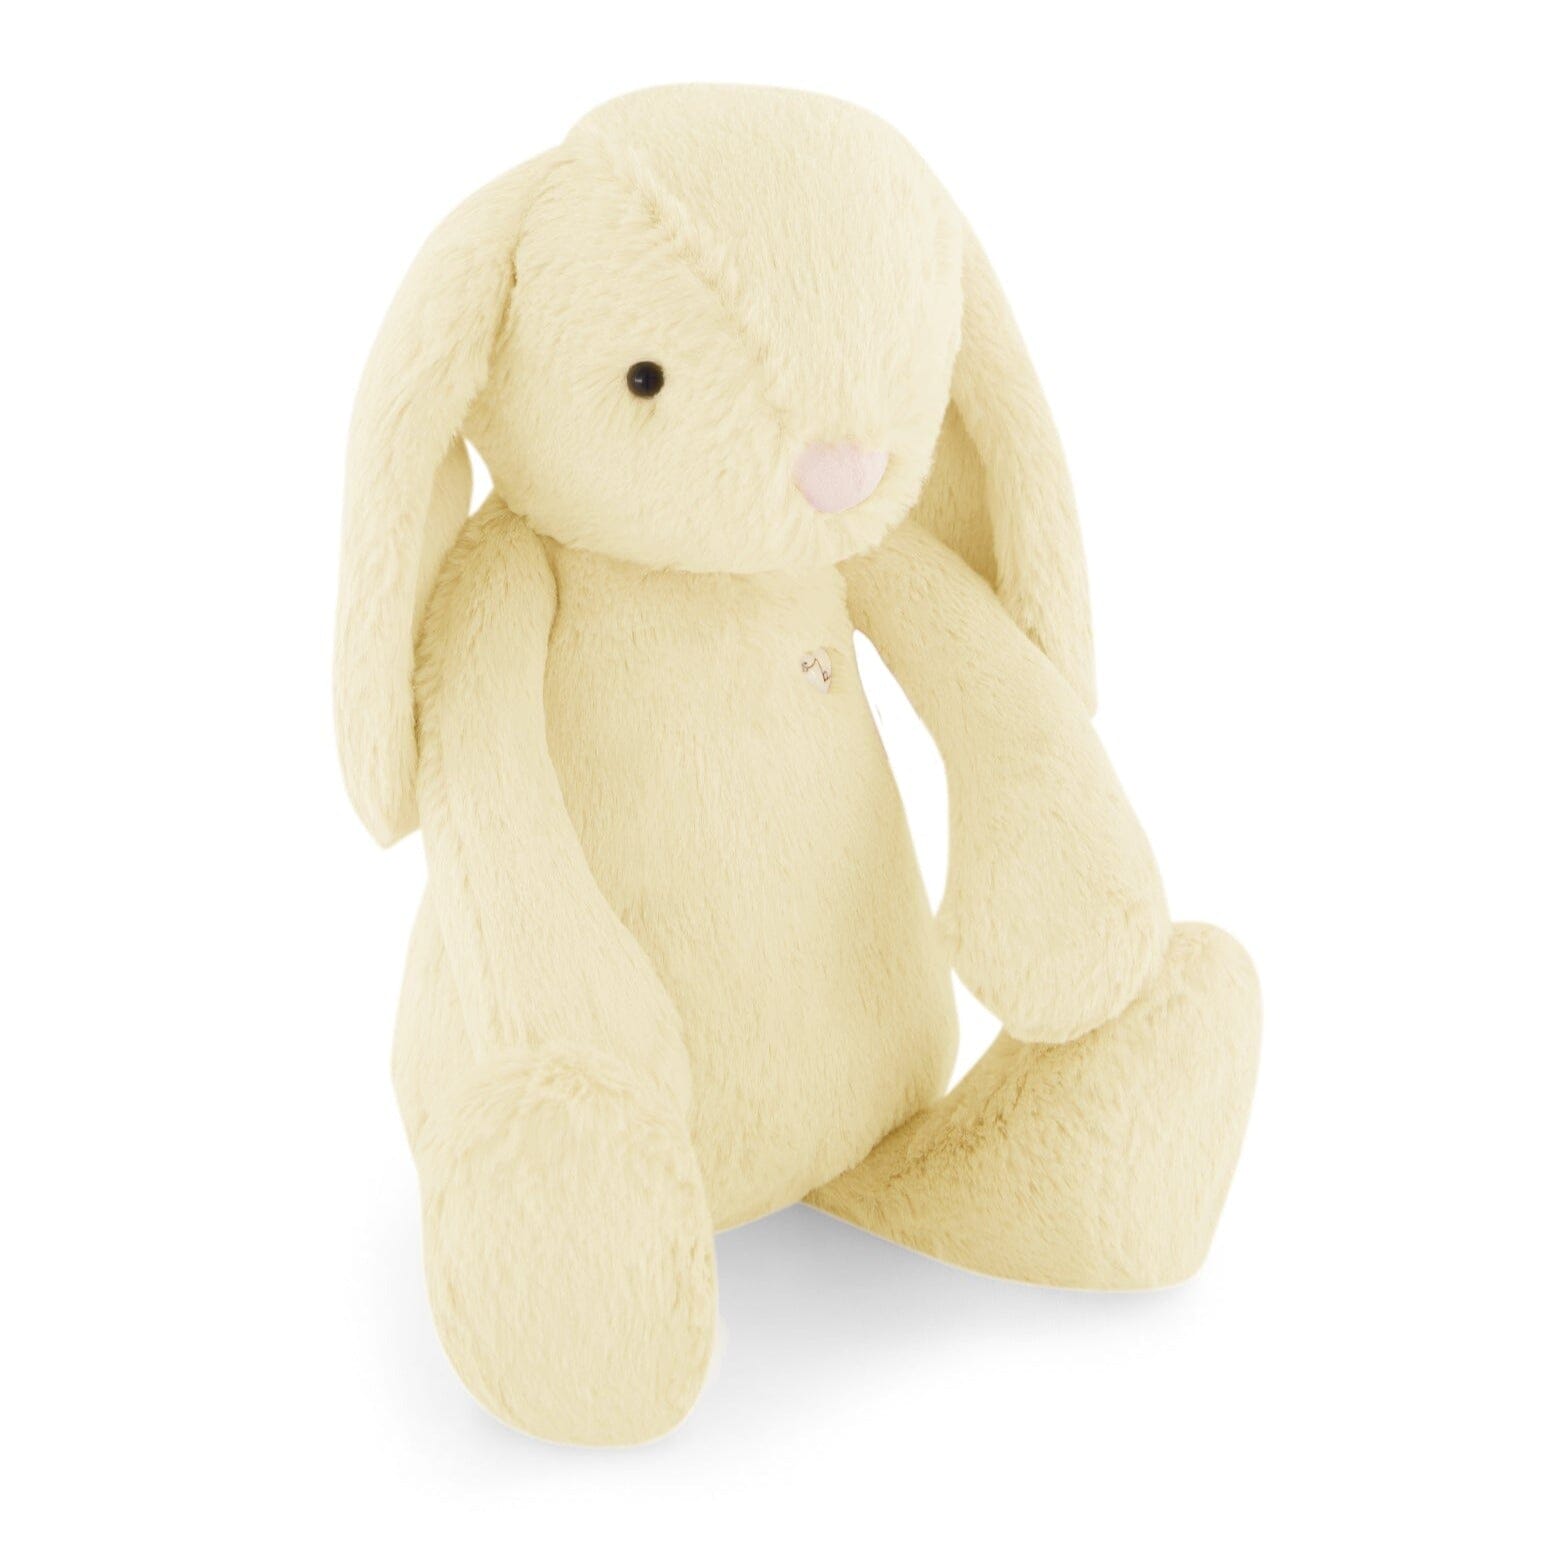 Penelope The Bunny - Snuggle Bunnies - Anise